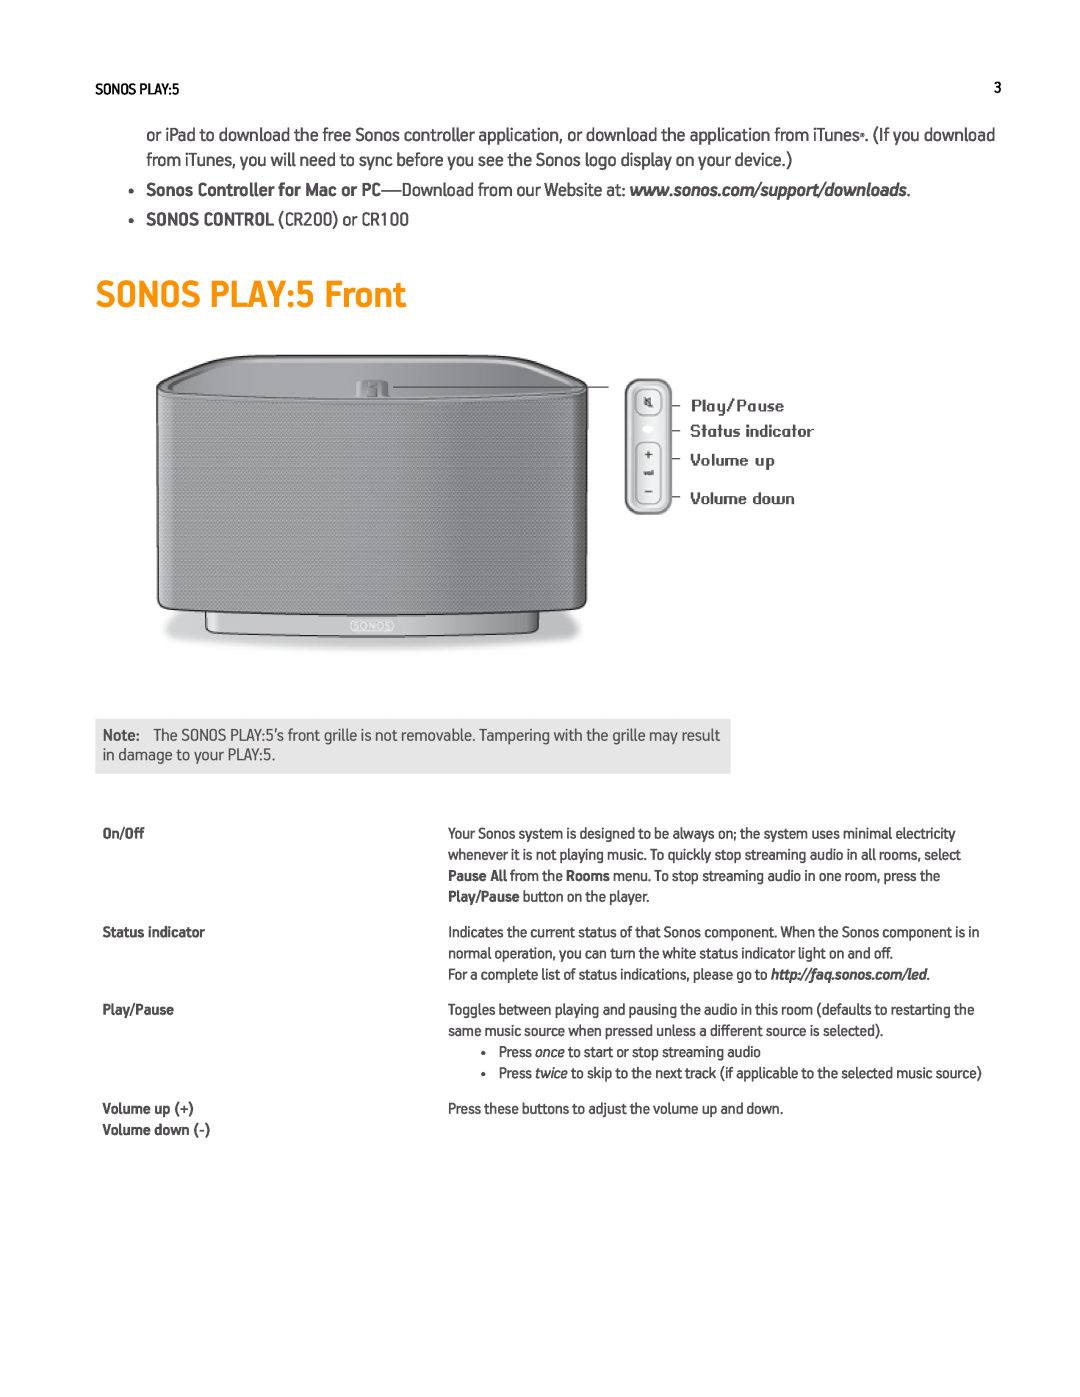 Sonos PLAY5WHITE SONOS PLAY 5 Front, Sonos Play, On/Off, Play/Pause button on the player, Status indicator, Volume up + 